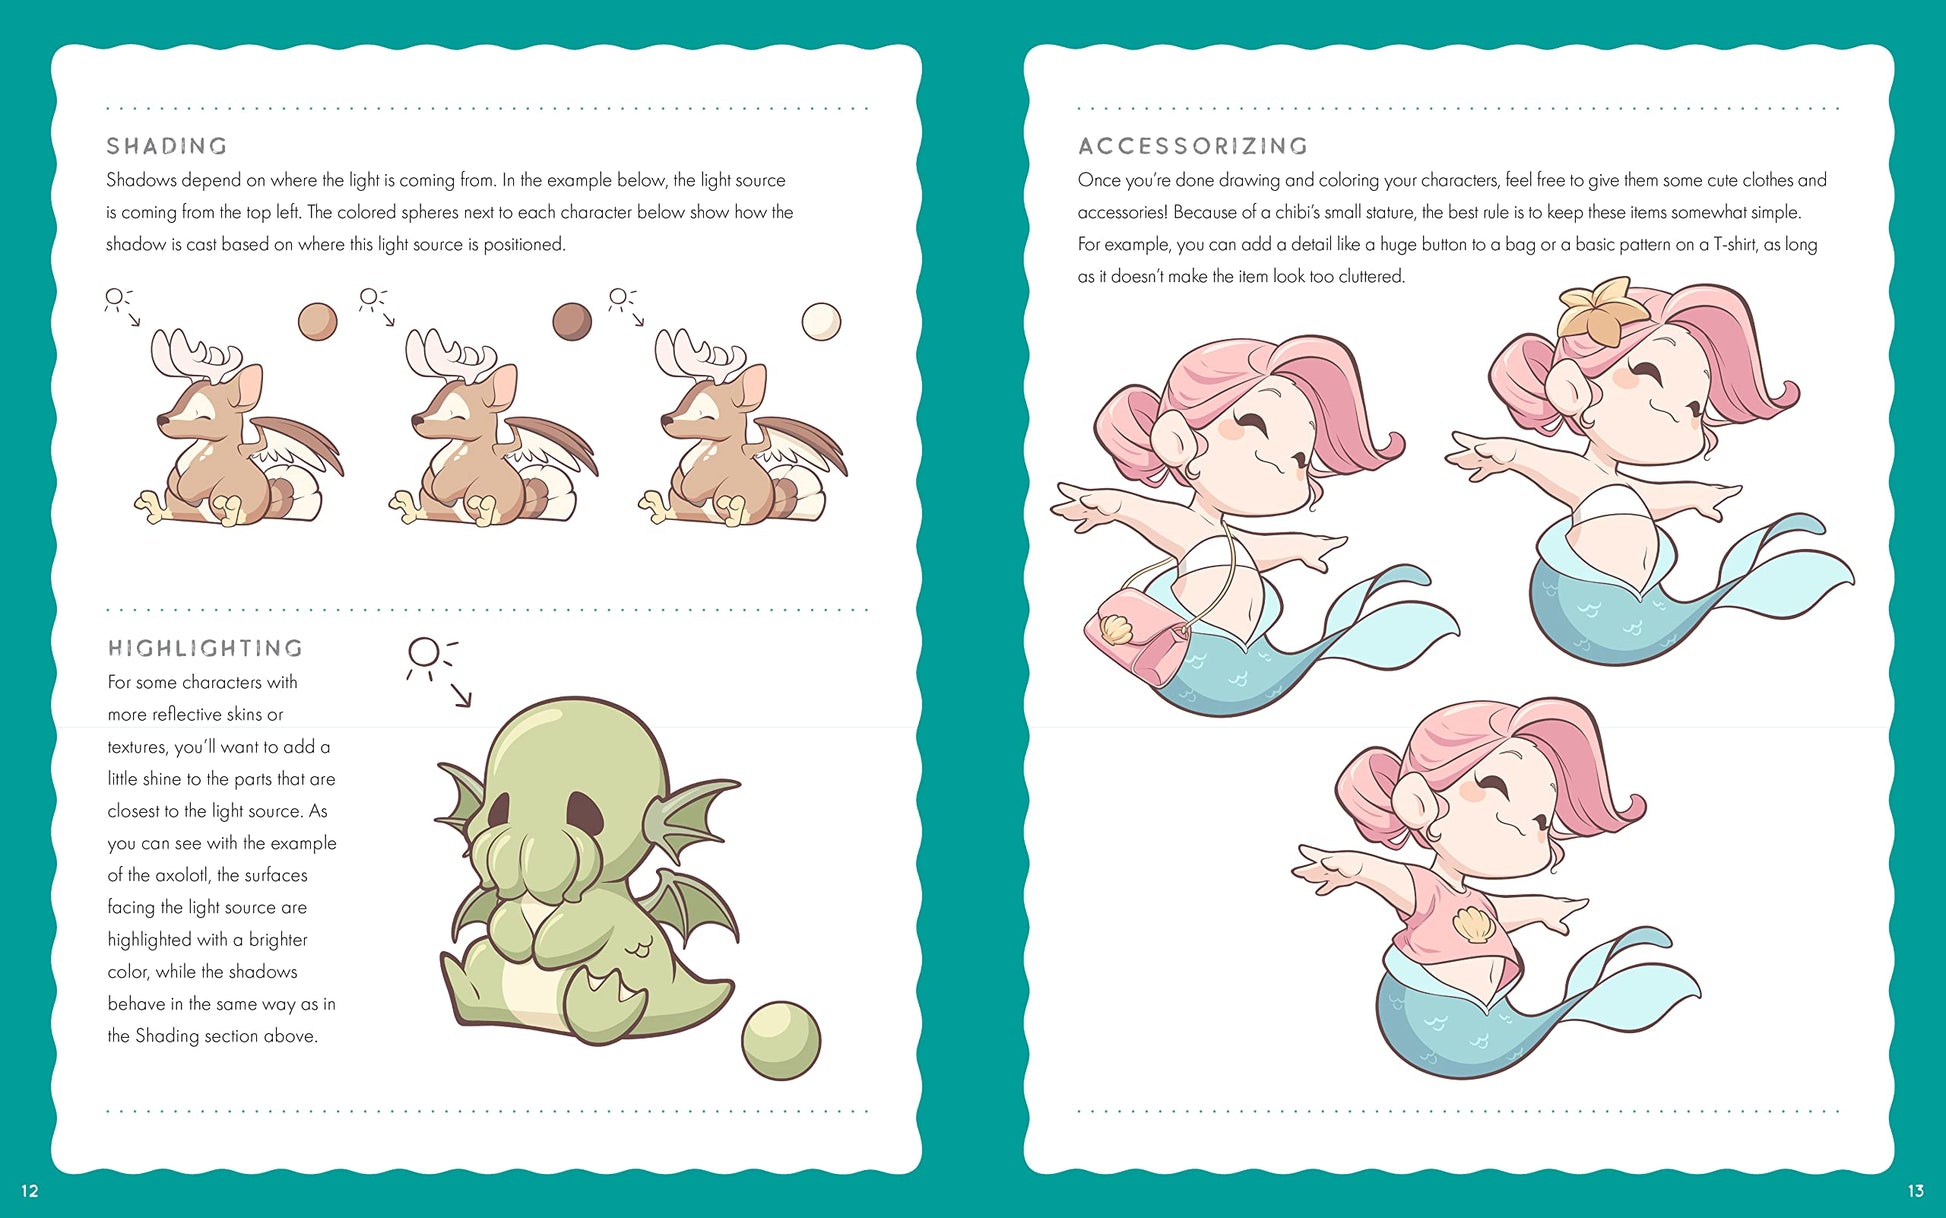 Cute Chibi Mythical Beasts & Magical Monsters: Learn How to Draw Over 60 Enchanting Creatures